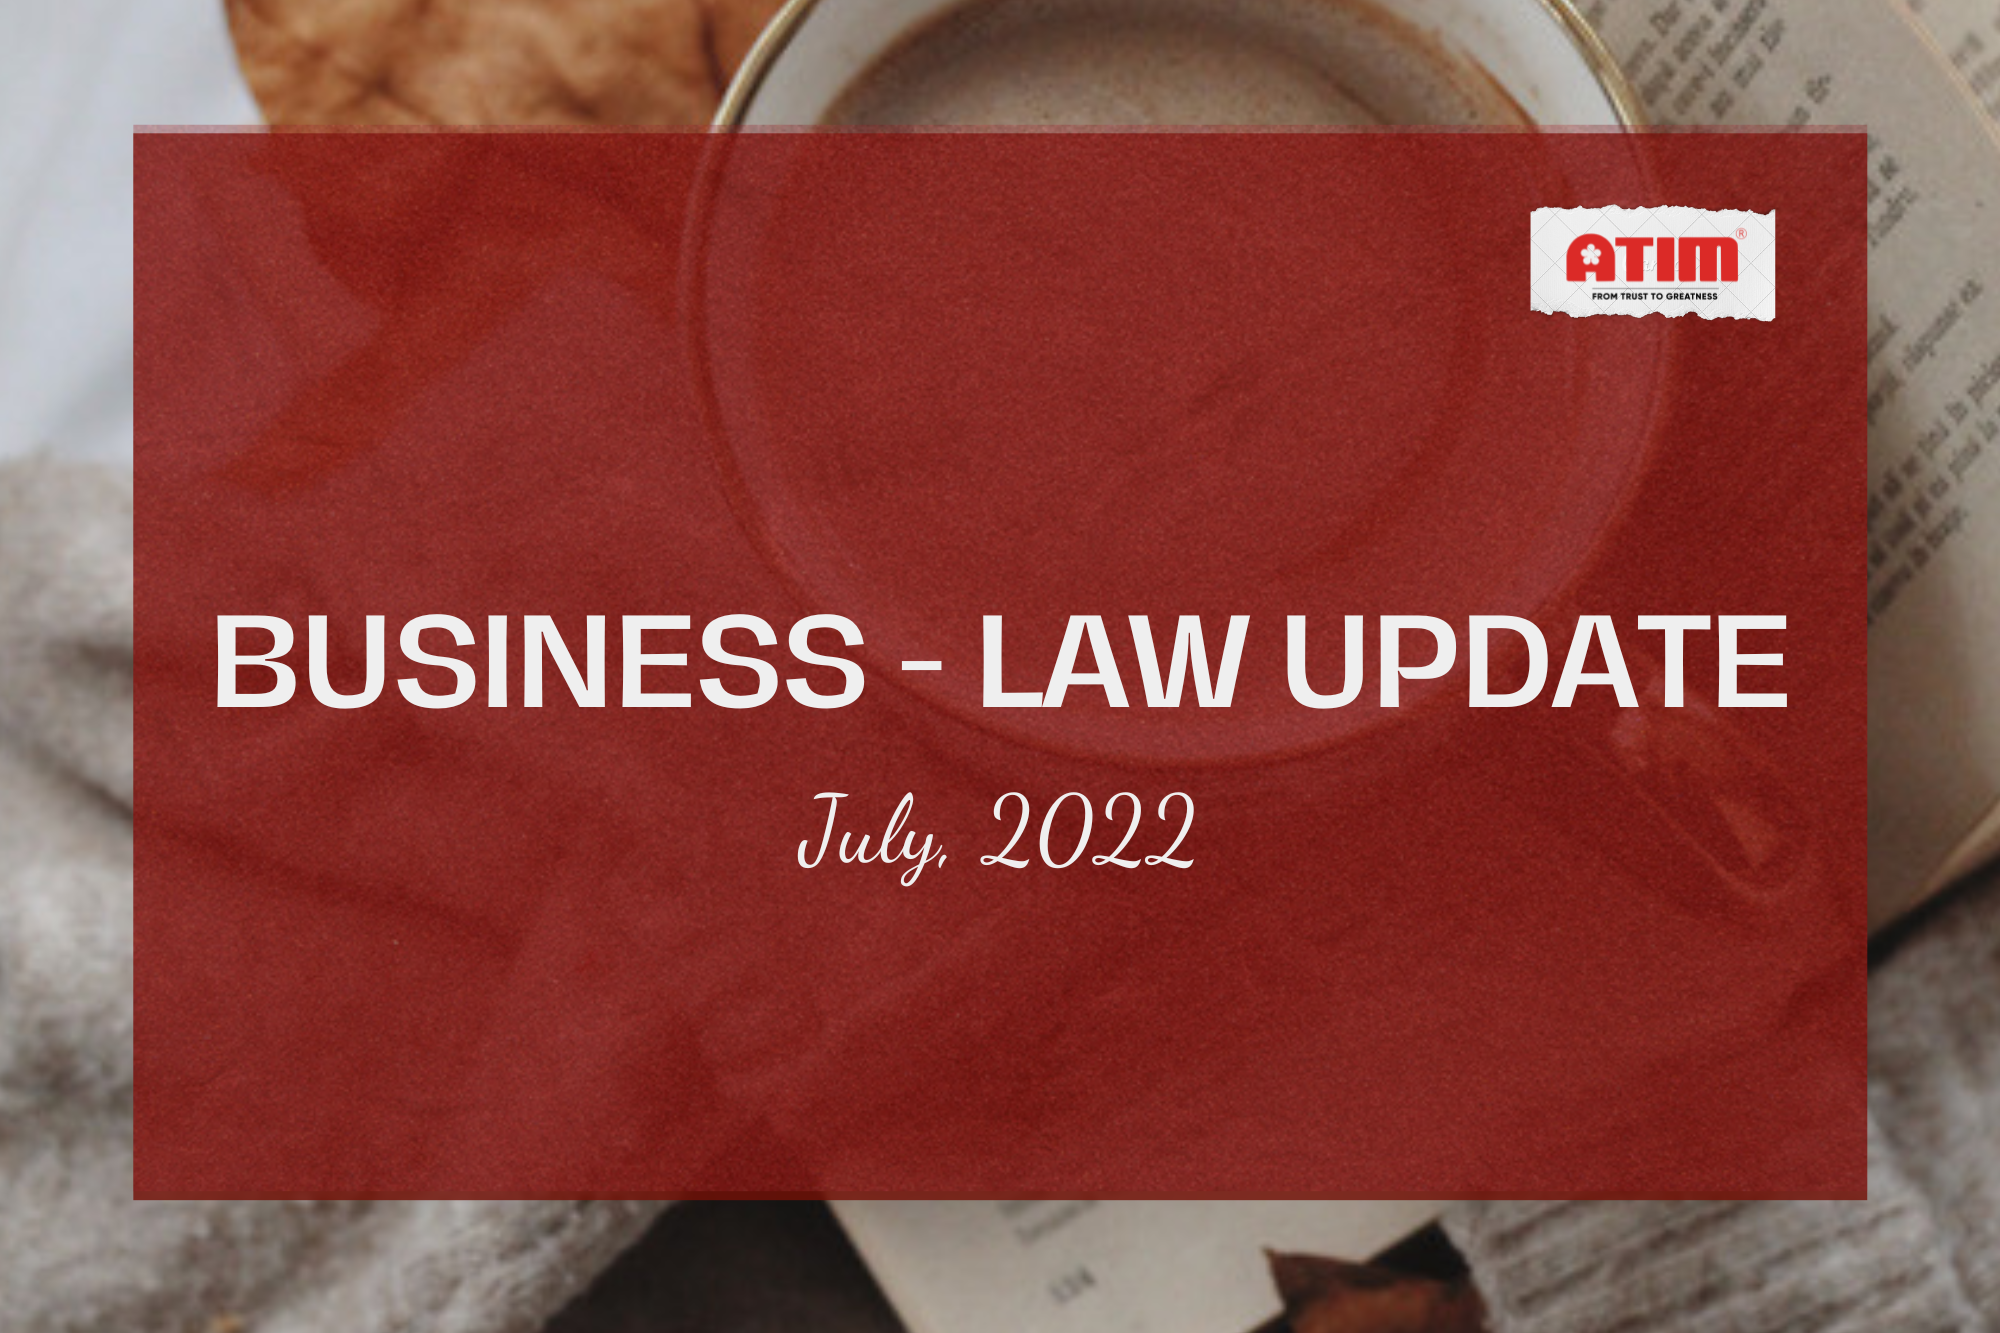 BUSINESS LAW UPDATE - JULY 2022